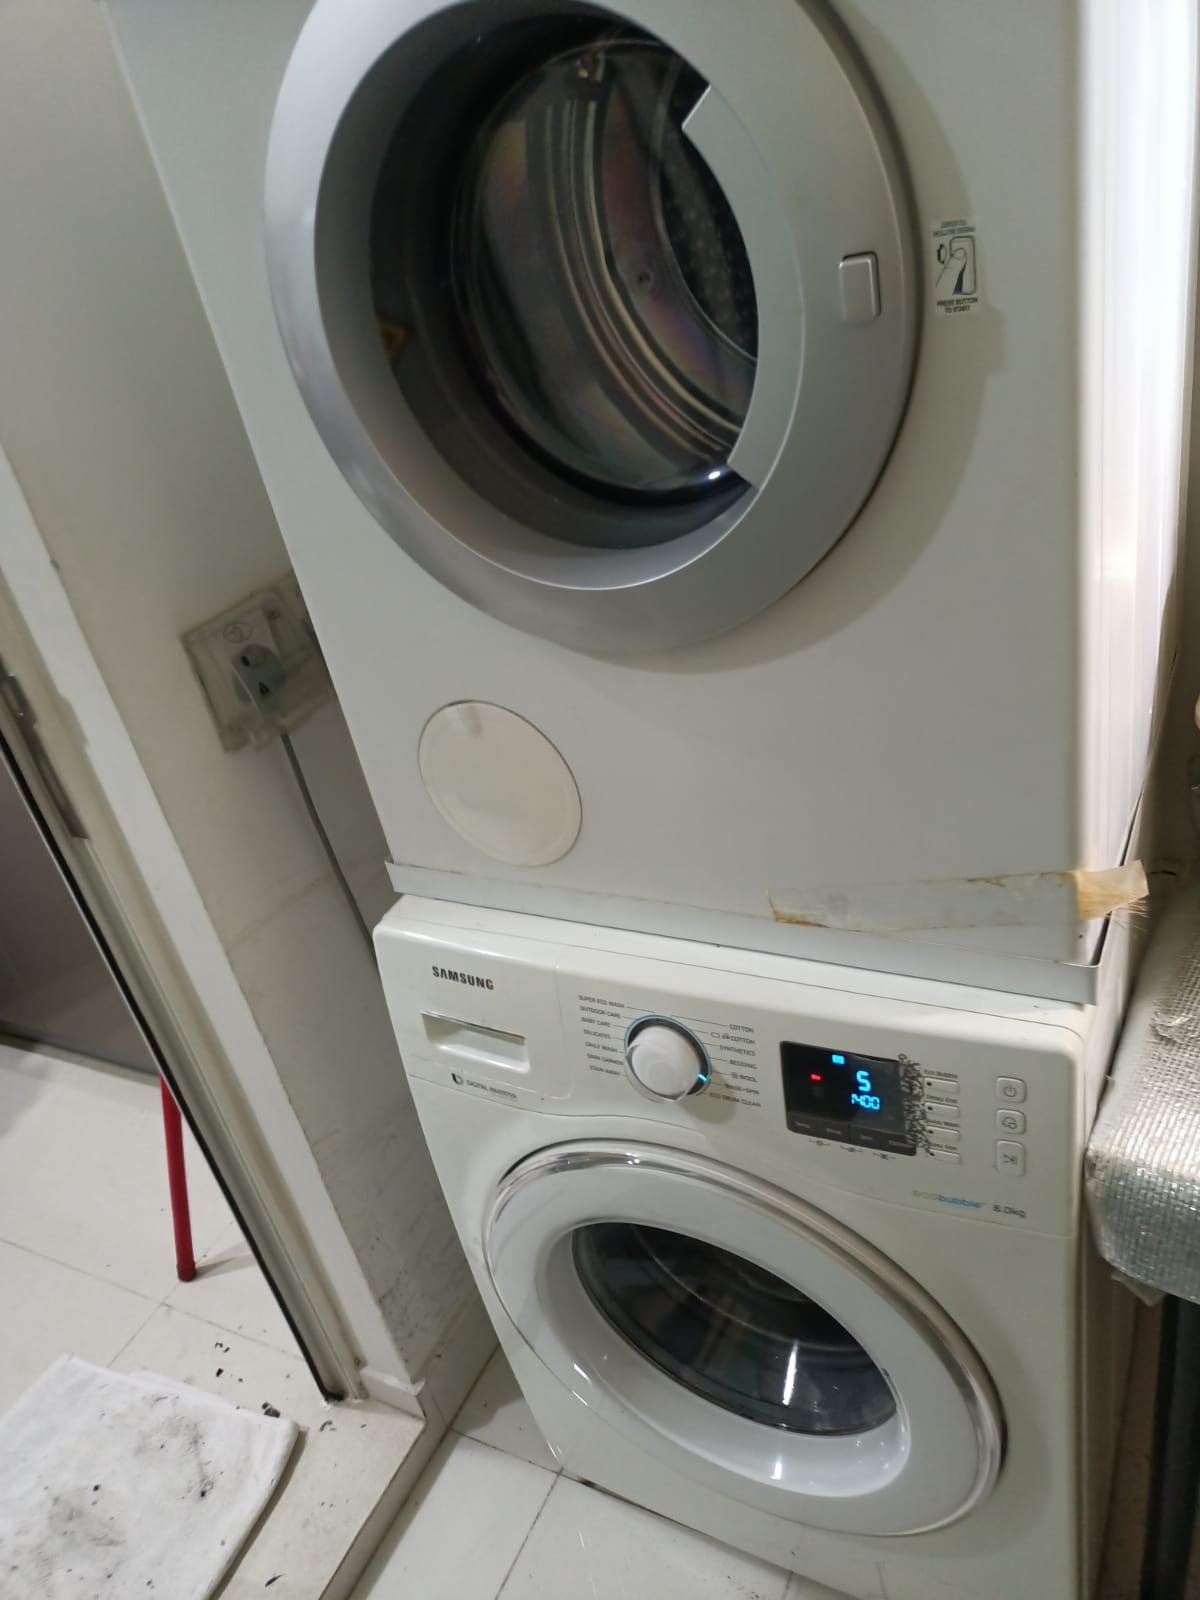 Washing Machine Checking For Filter Issue 1